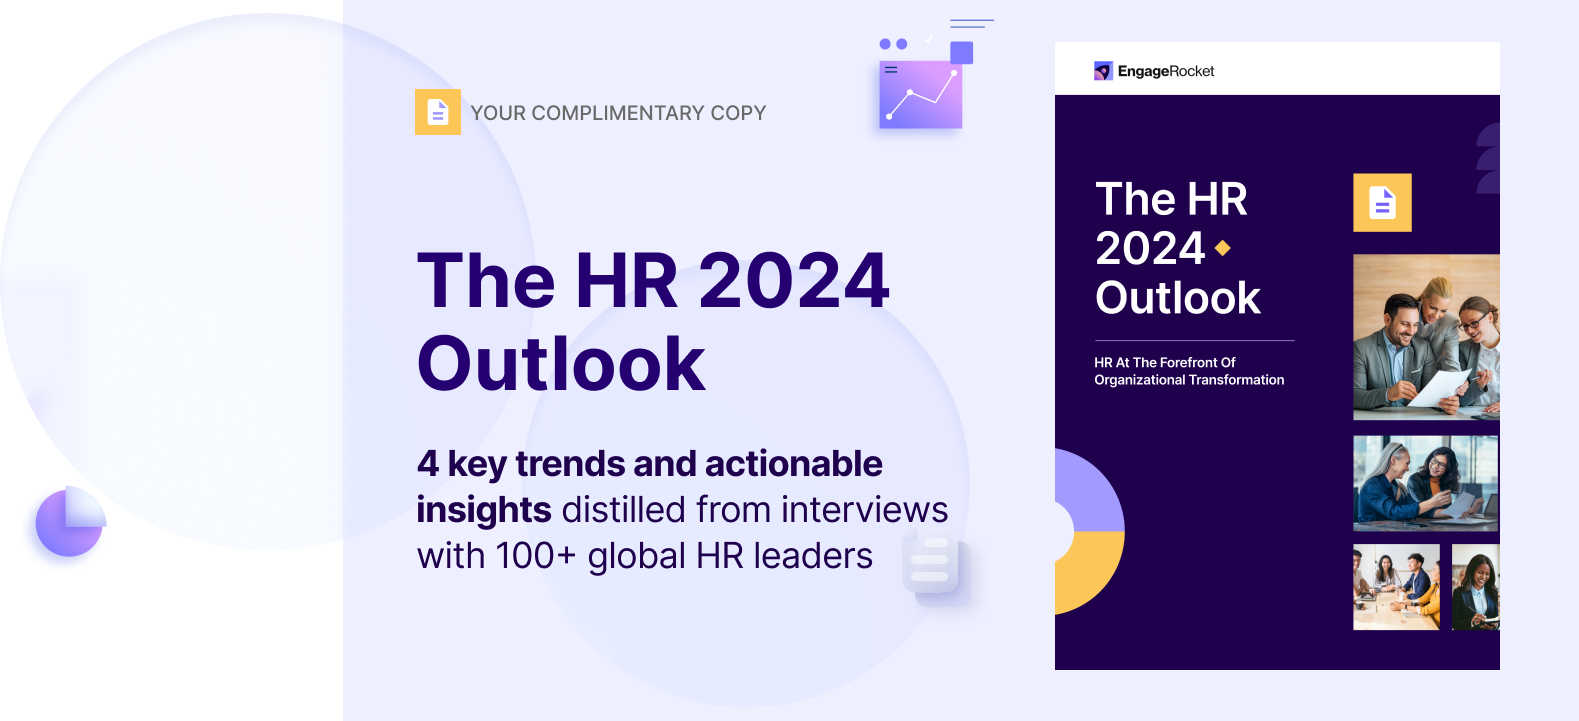 The HR 2024 Outlook EngageRocket